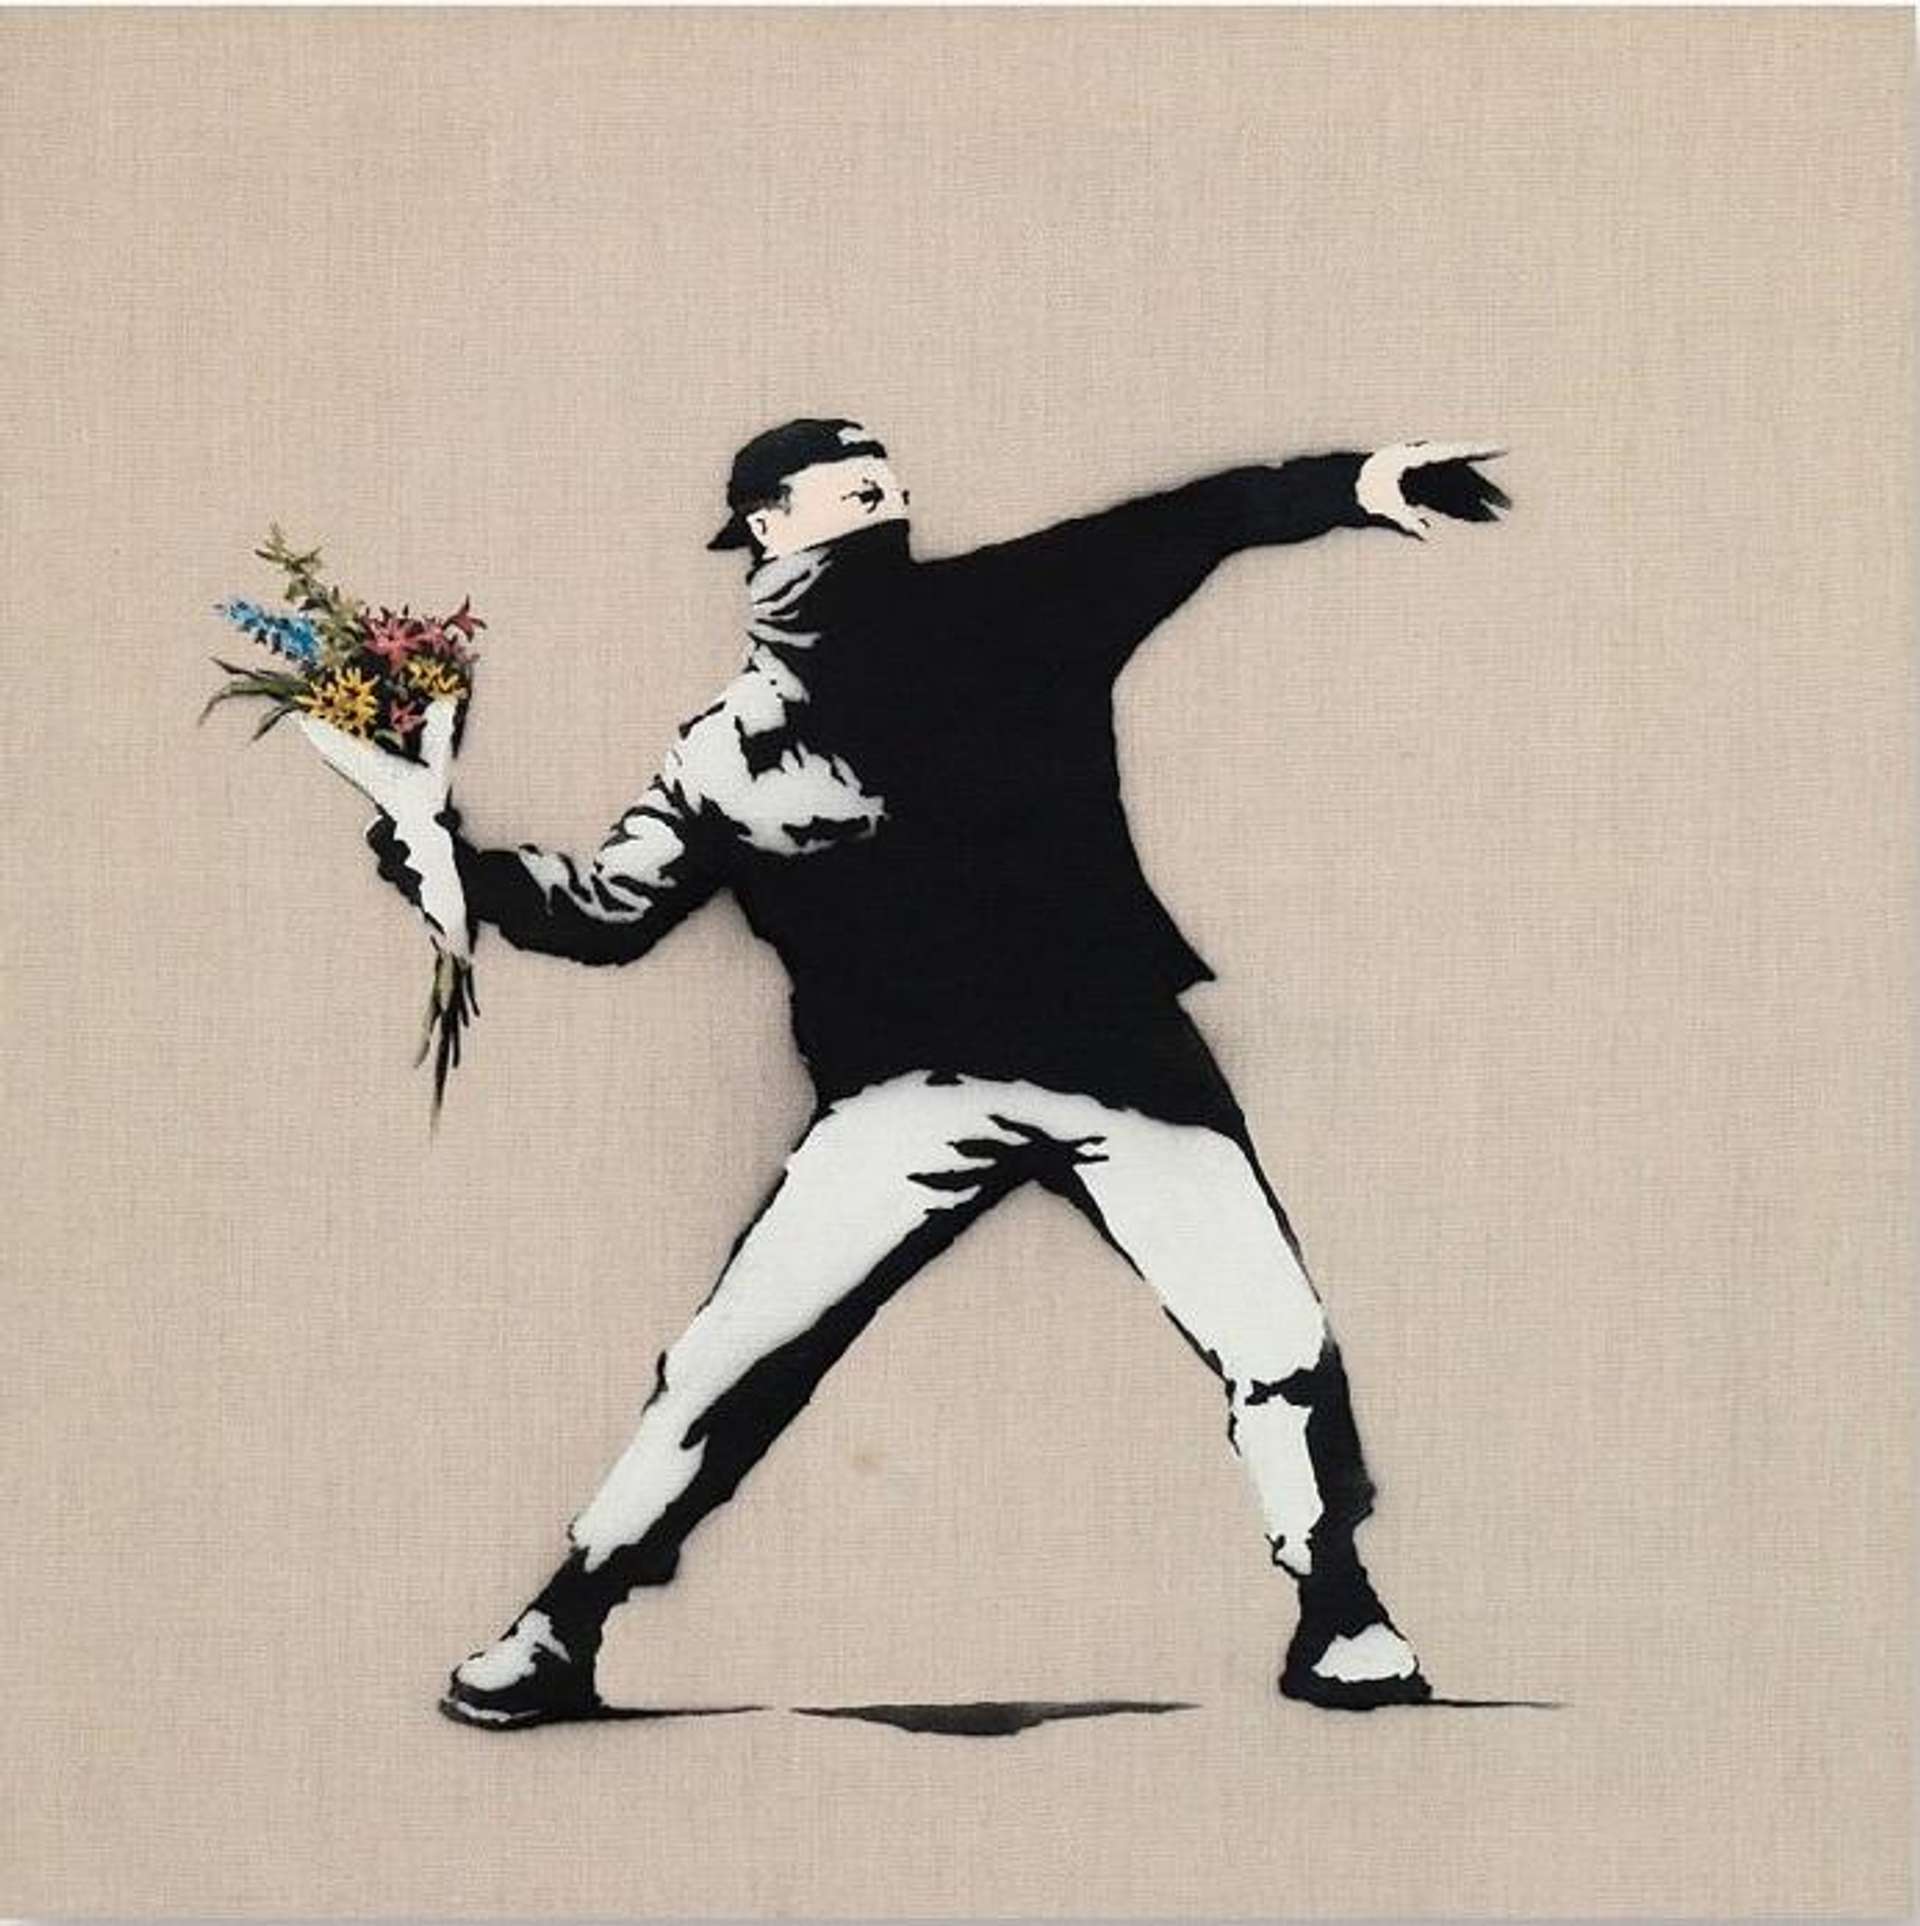 A screenprint by Banksy depicting a balaclava-wearing man holding a bouquet of flowers instead of a bomb